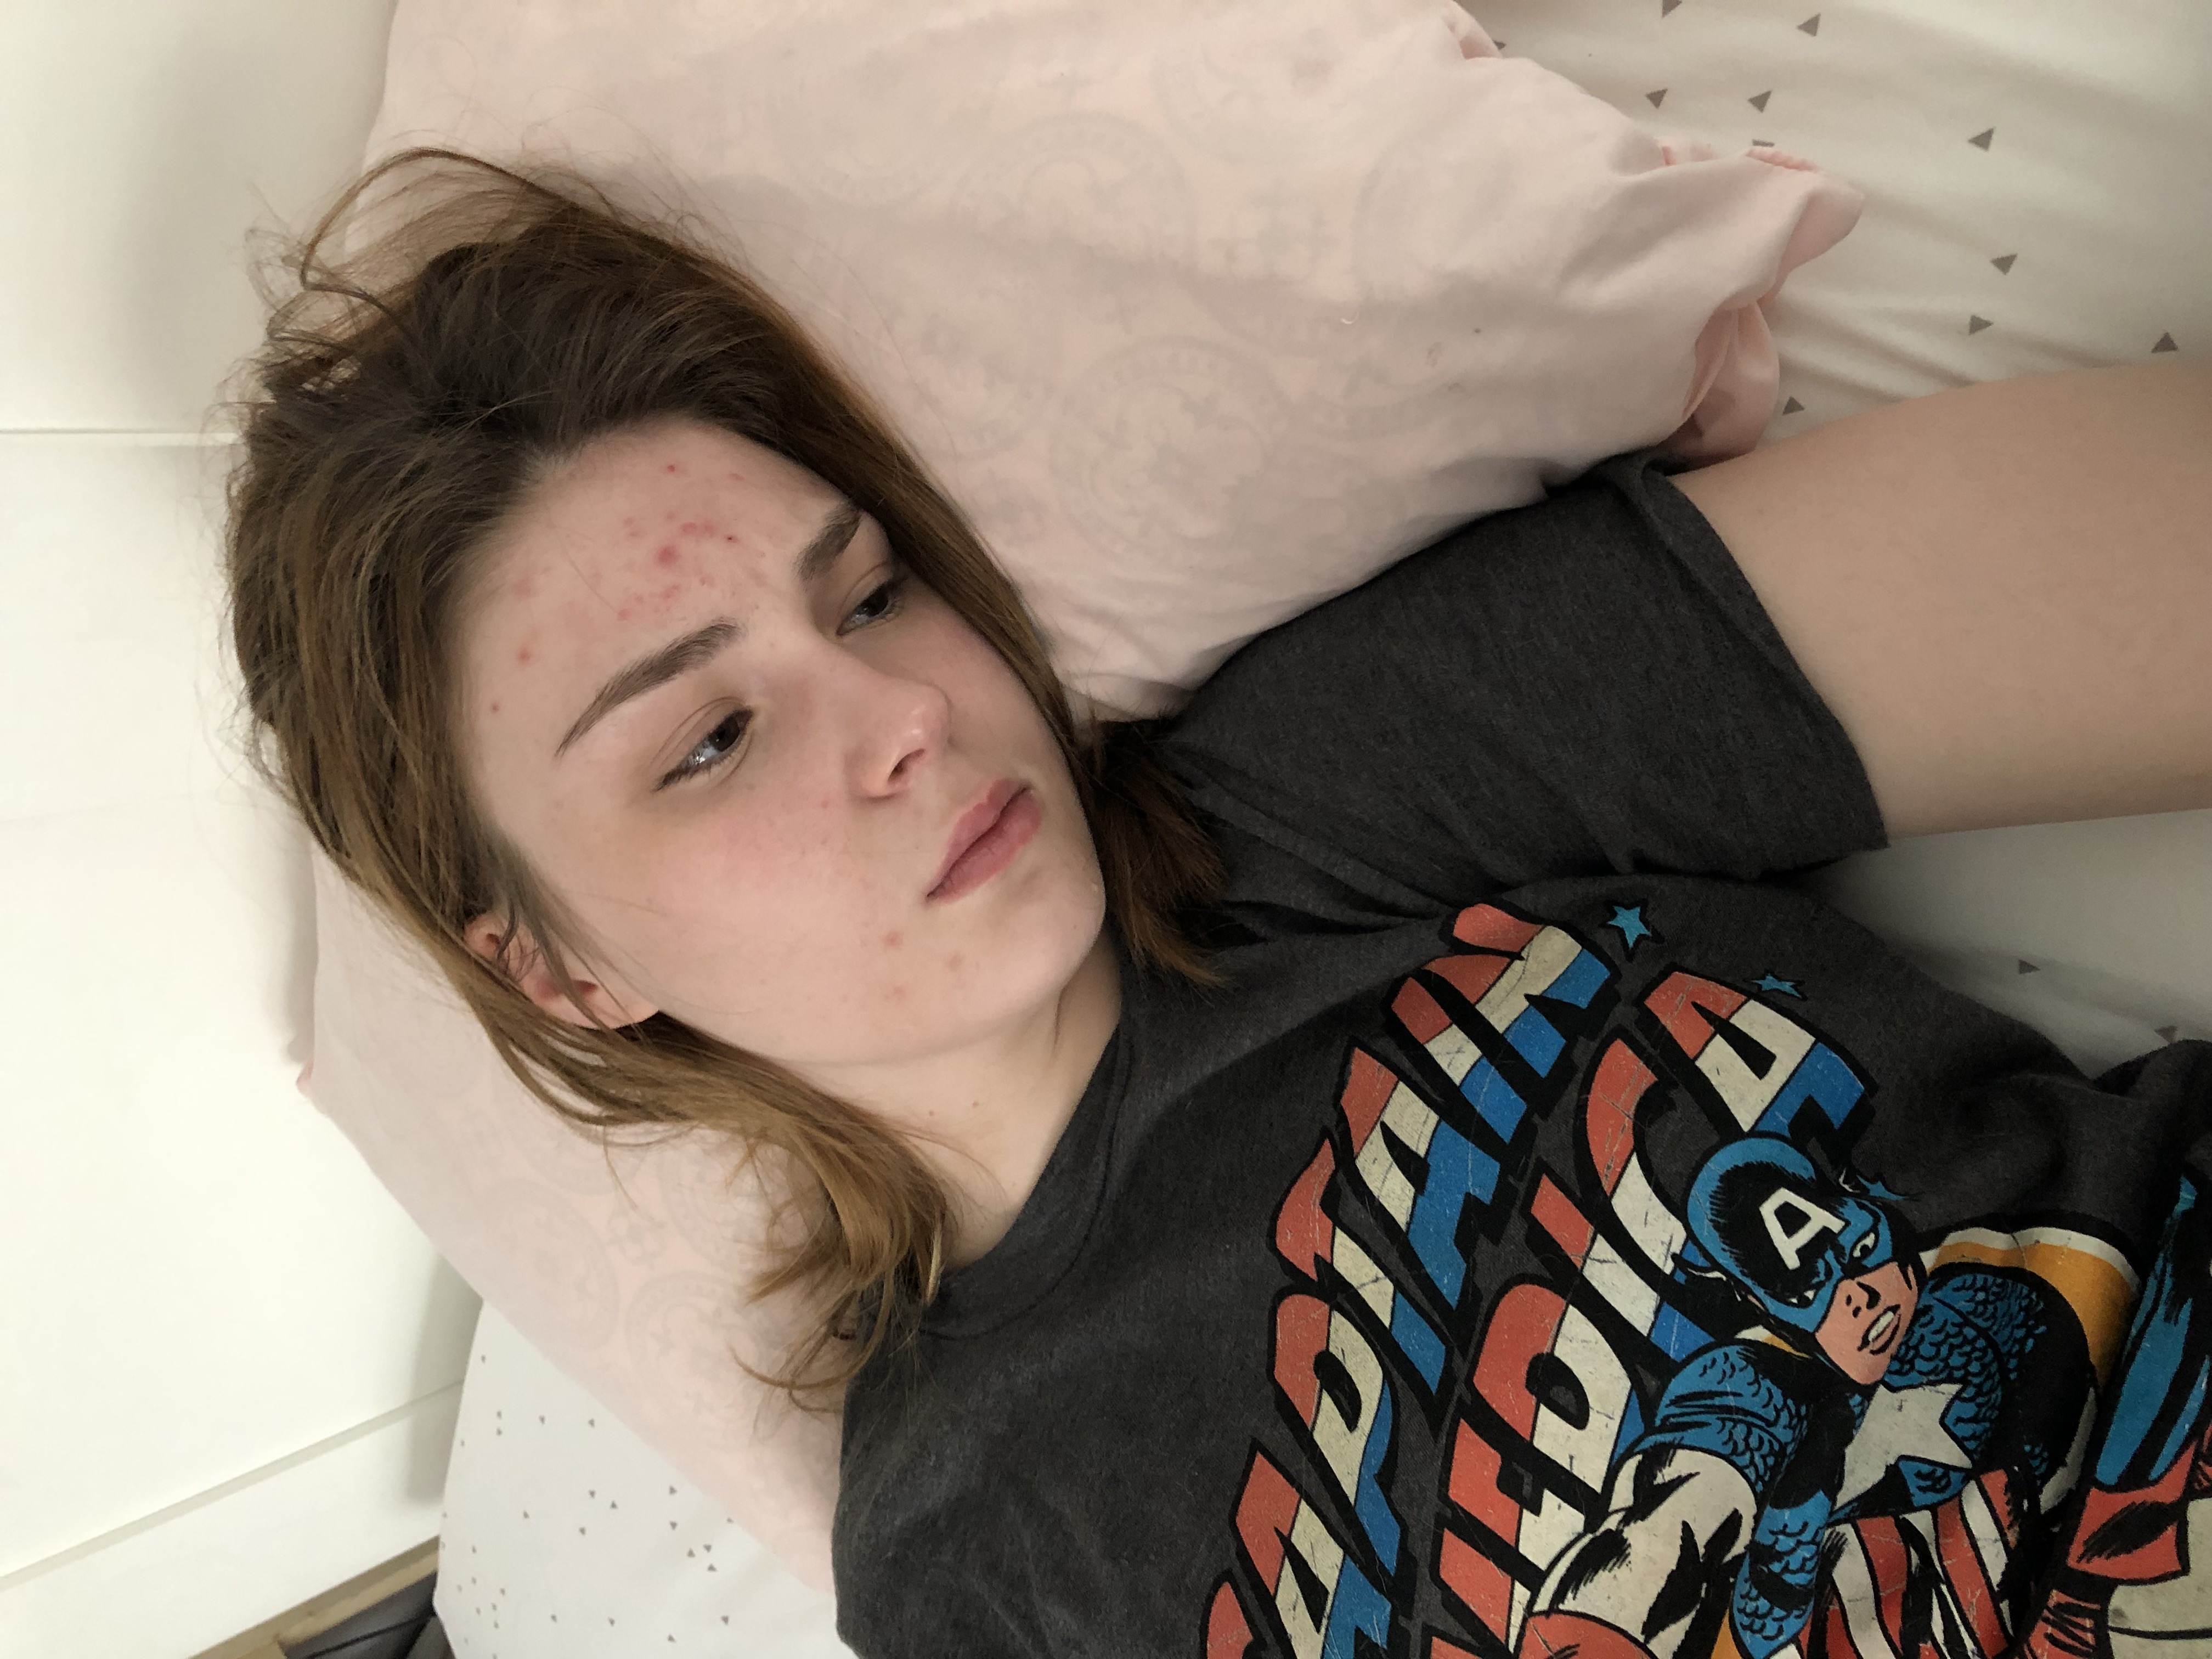 Young woman laying on bed with a Captain America T-shirt on.